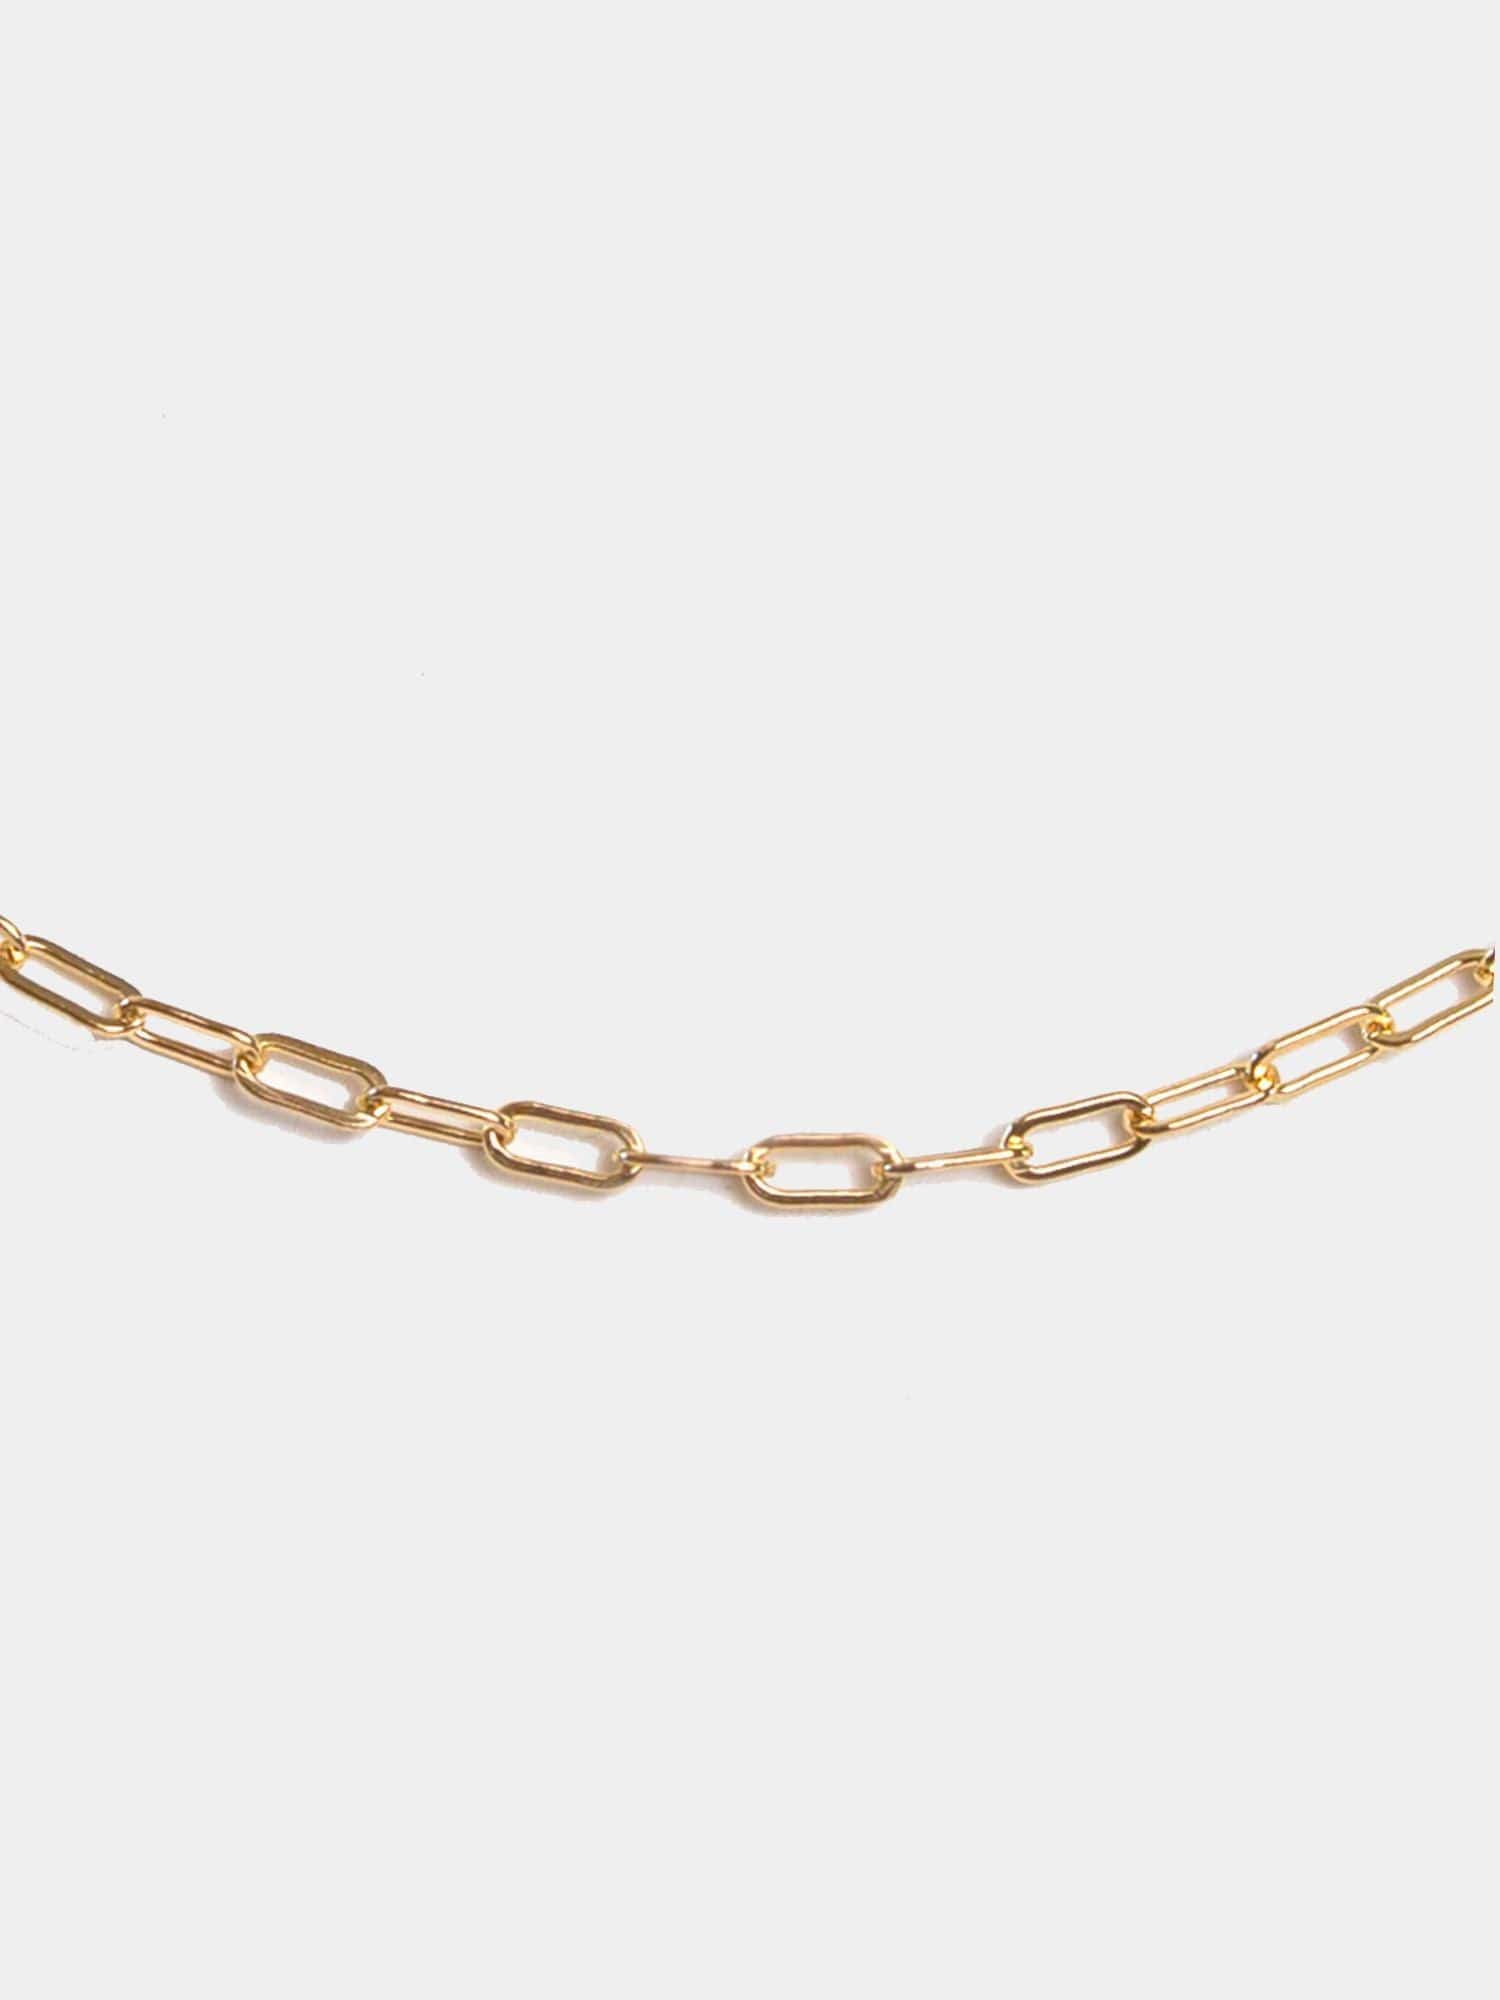 Shop OXB Necklaces Gold Filled / 16" Paperclip Chain